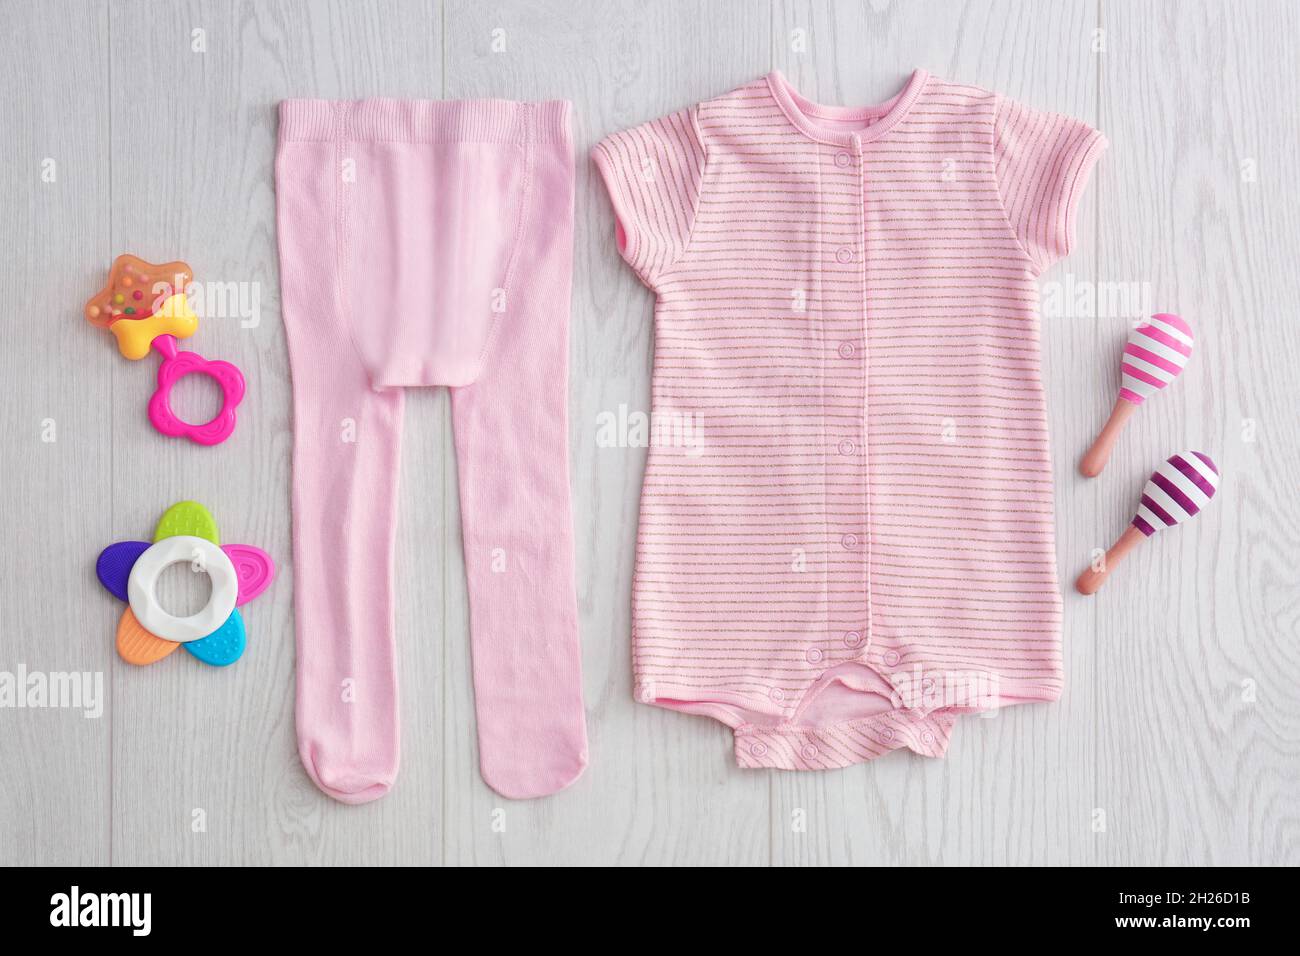 Flat lay composition with fashionable children's clothes on wooden ...